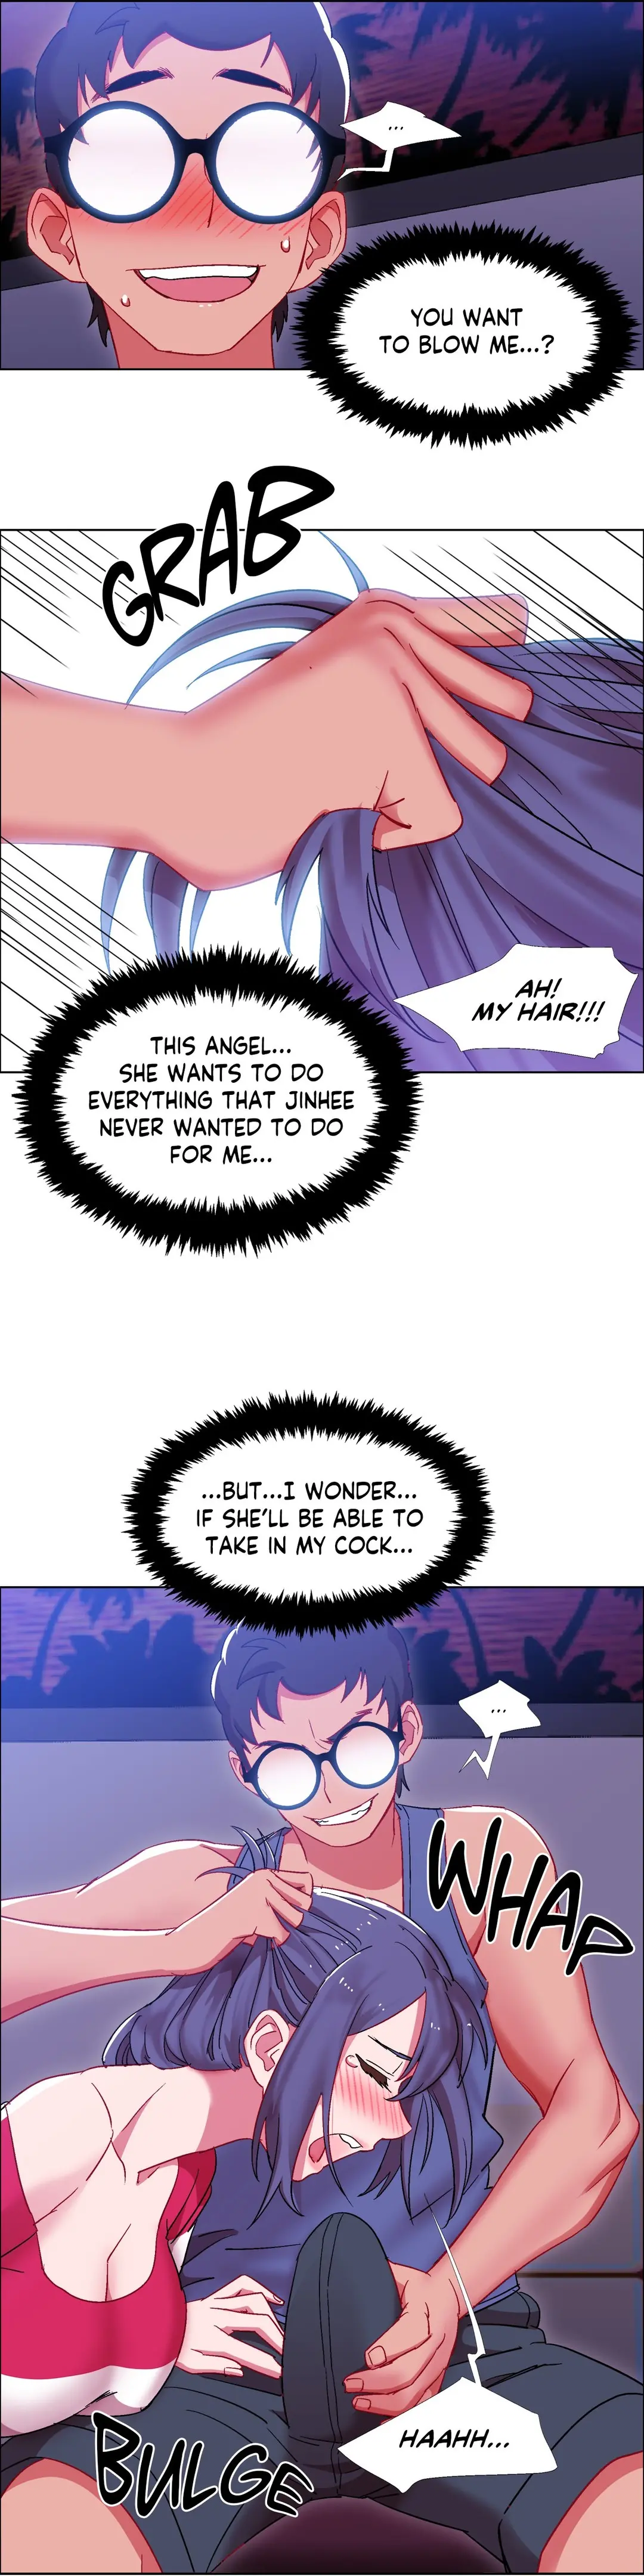 Rental Girls Chapter 20 - Page 2